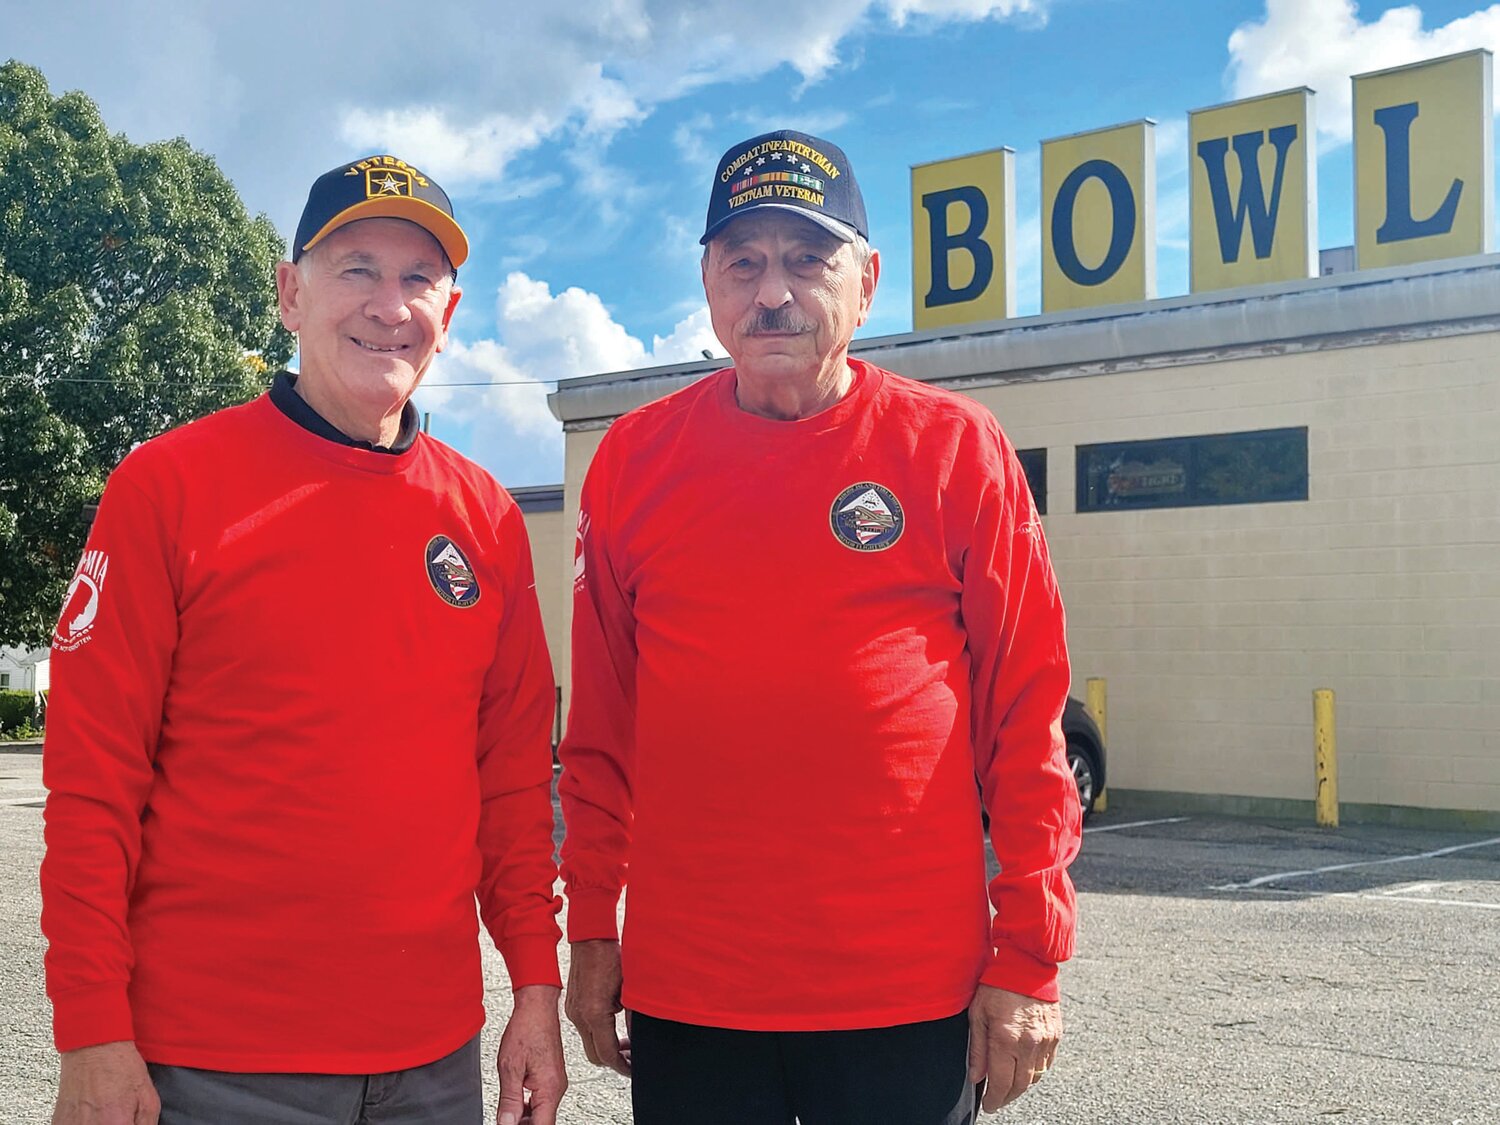 MEMORY LANES: Retired U.S. Army Sgt. John Tammelleo and Corp. Mario DeAngelis, both of Johnston, are bowling buddies and Vietnam War era veterans. On Sunday, they’ll be among 55 Ocean State veterans aboard a RI Honor Flight to Washington D.C.